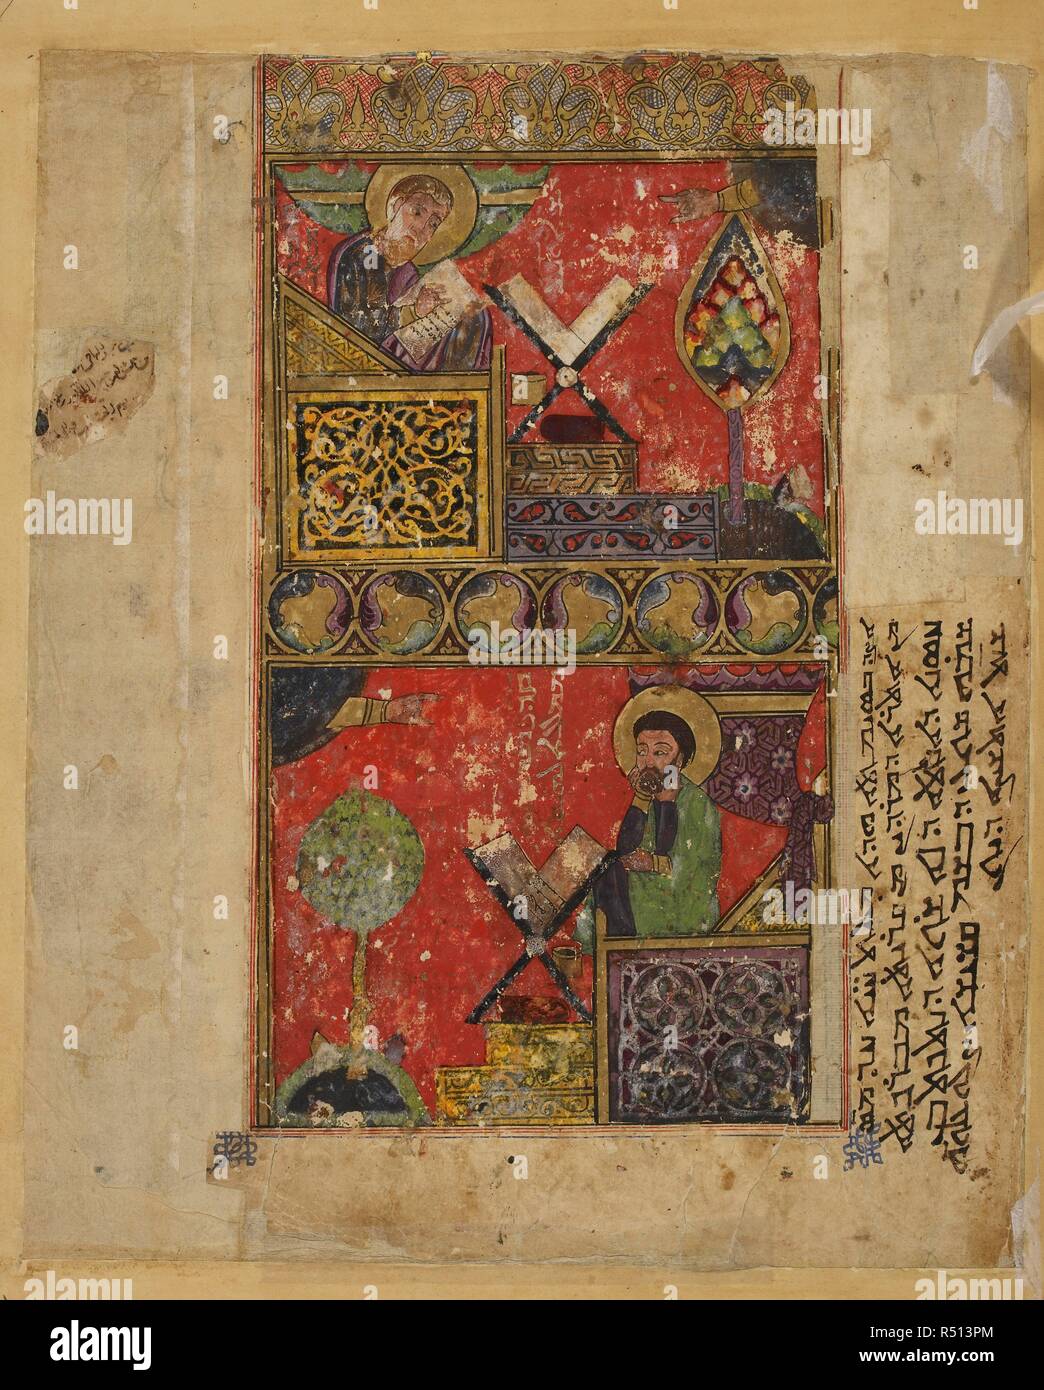 The four Evangelists. Mark, Matthew, Luke and John are depicted seated in front of a cradle copying their Gospels. Syriac Lectionary. Mosul (Iraq), 1216-1220. This manuscript contains passages from the Gospels in liturgical sequence that are used as readings in church services. Tempera on paper. Source: Add. 7170, f.7. Language: Syriac. Stock Photo